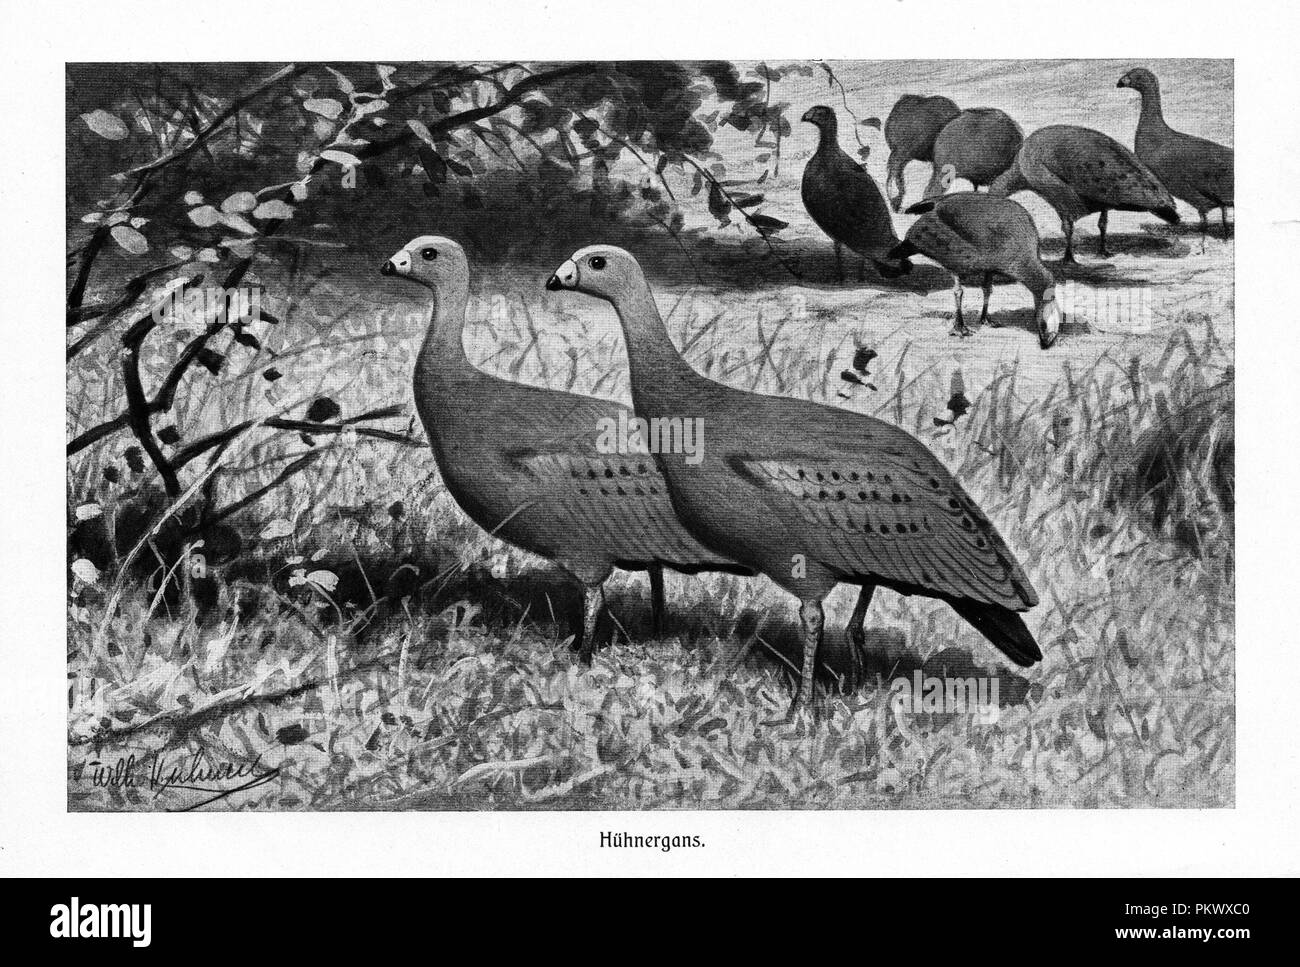 Cape Barren Geese, Antique book illustrations, scanned. Images contain a set of birds, originally illustrated for encyclopedias of the late 1800s. Stock Photo